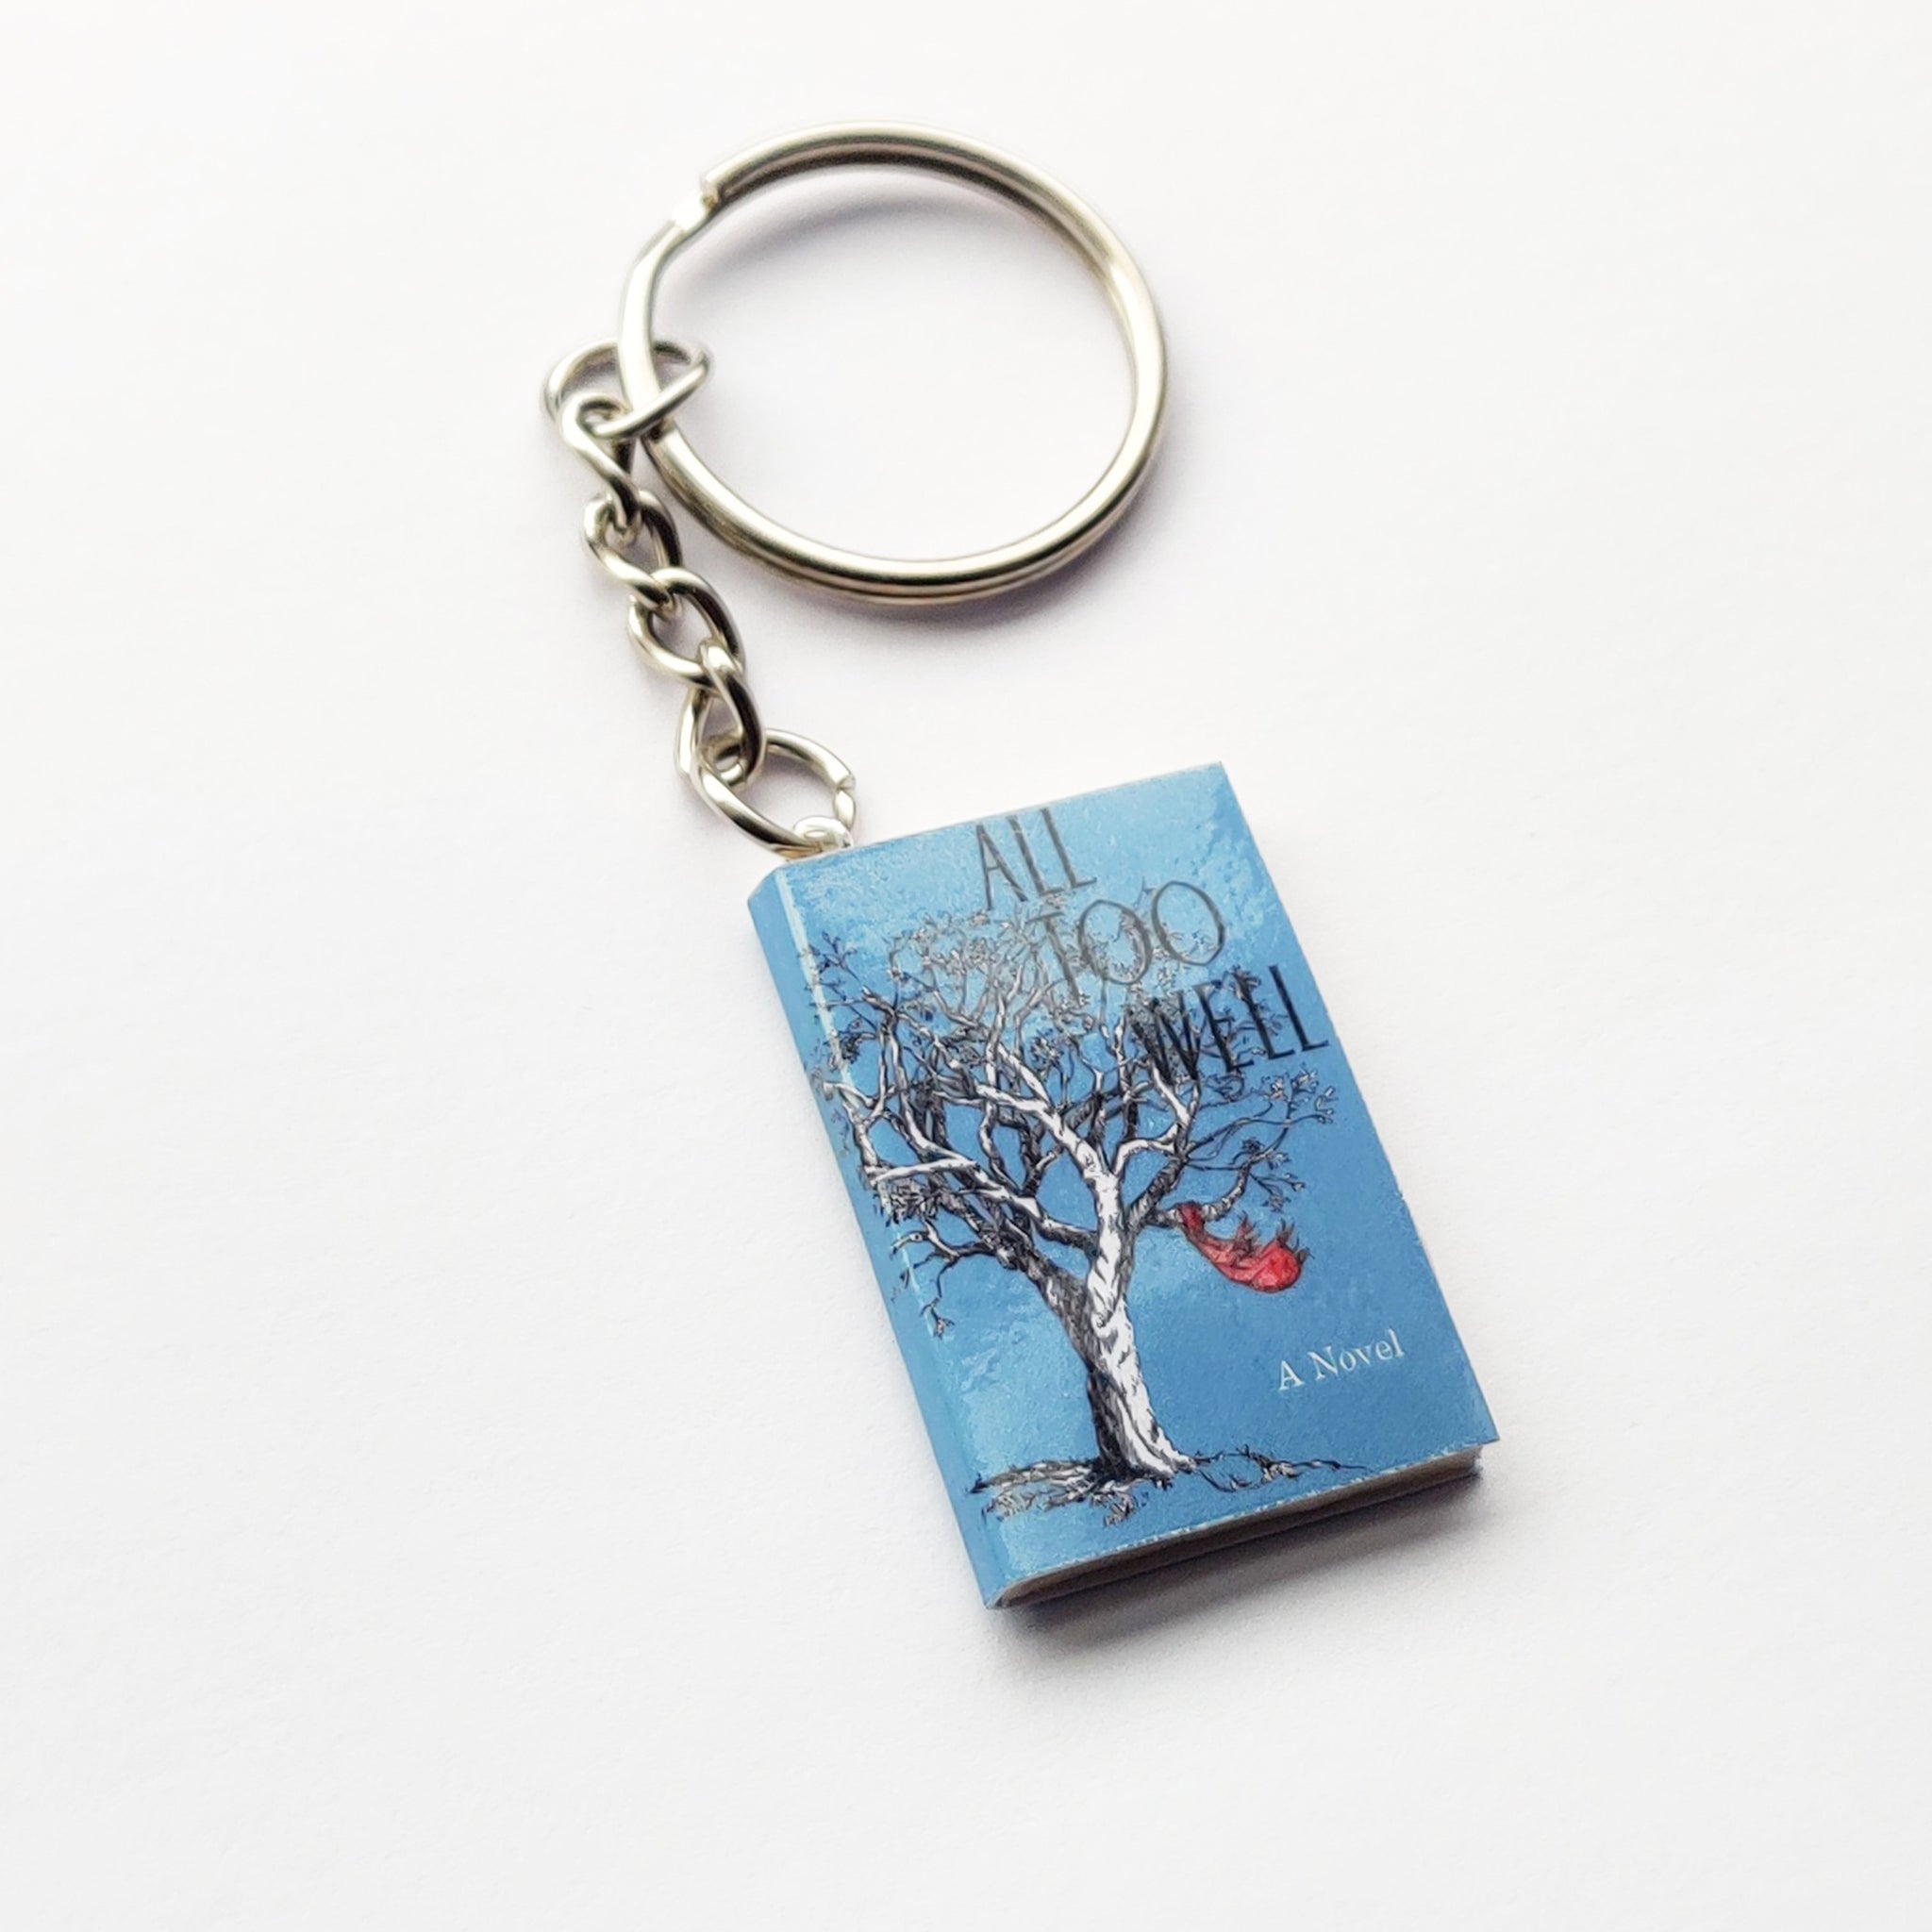 All Too Well Taylor Swift Miniature Book Necklace Keychain – FromNewLeaf